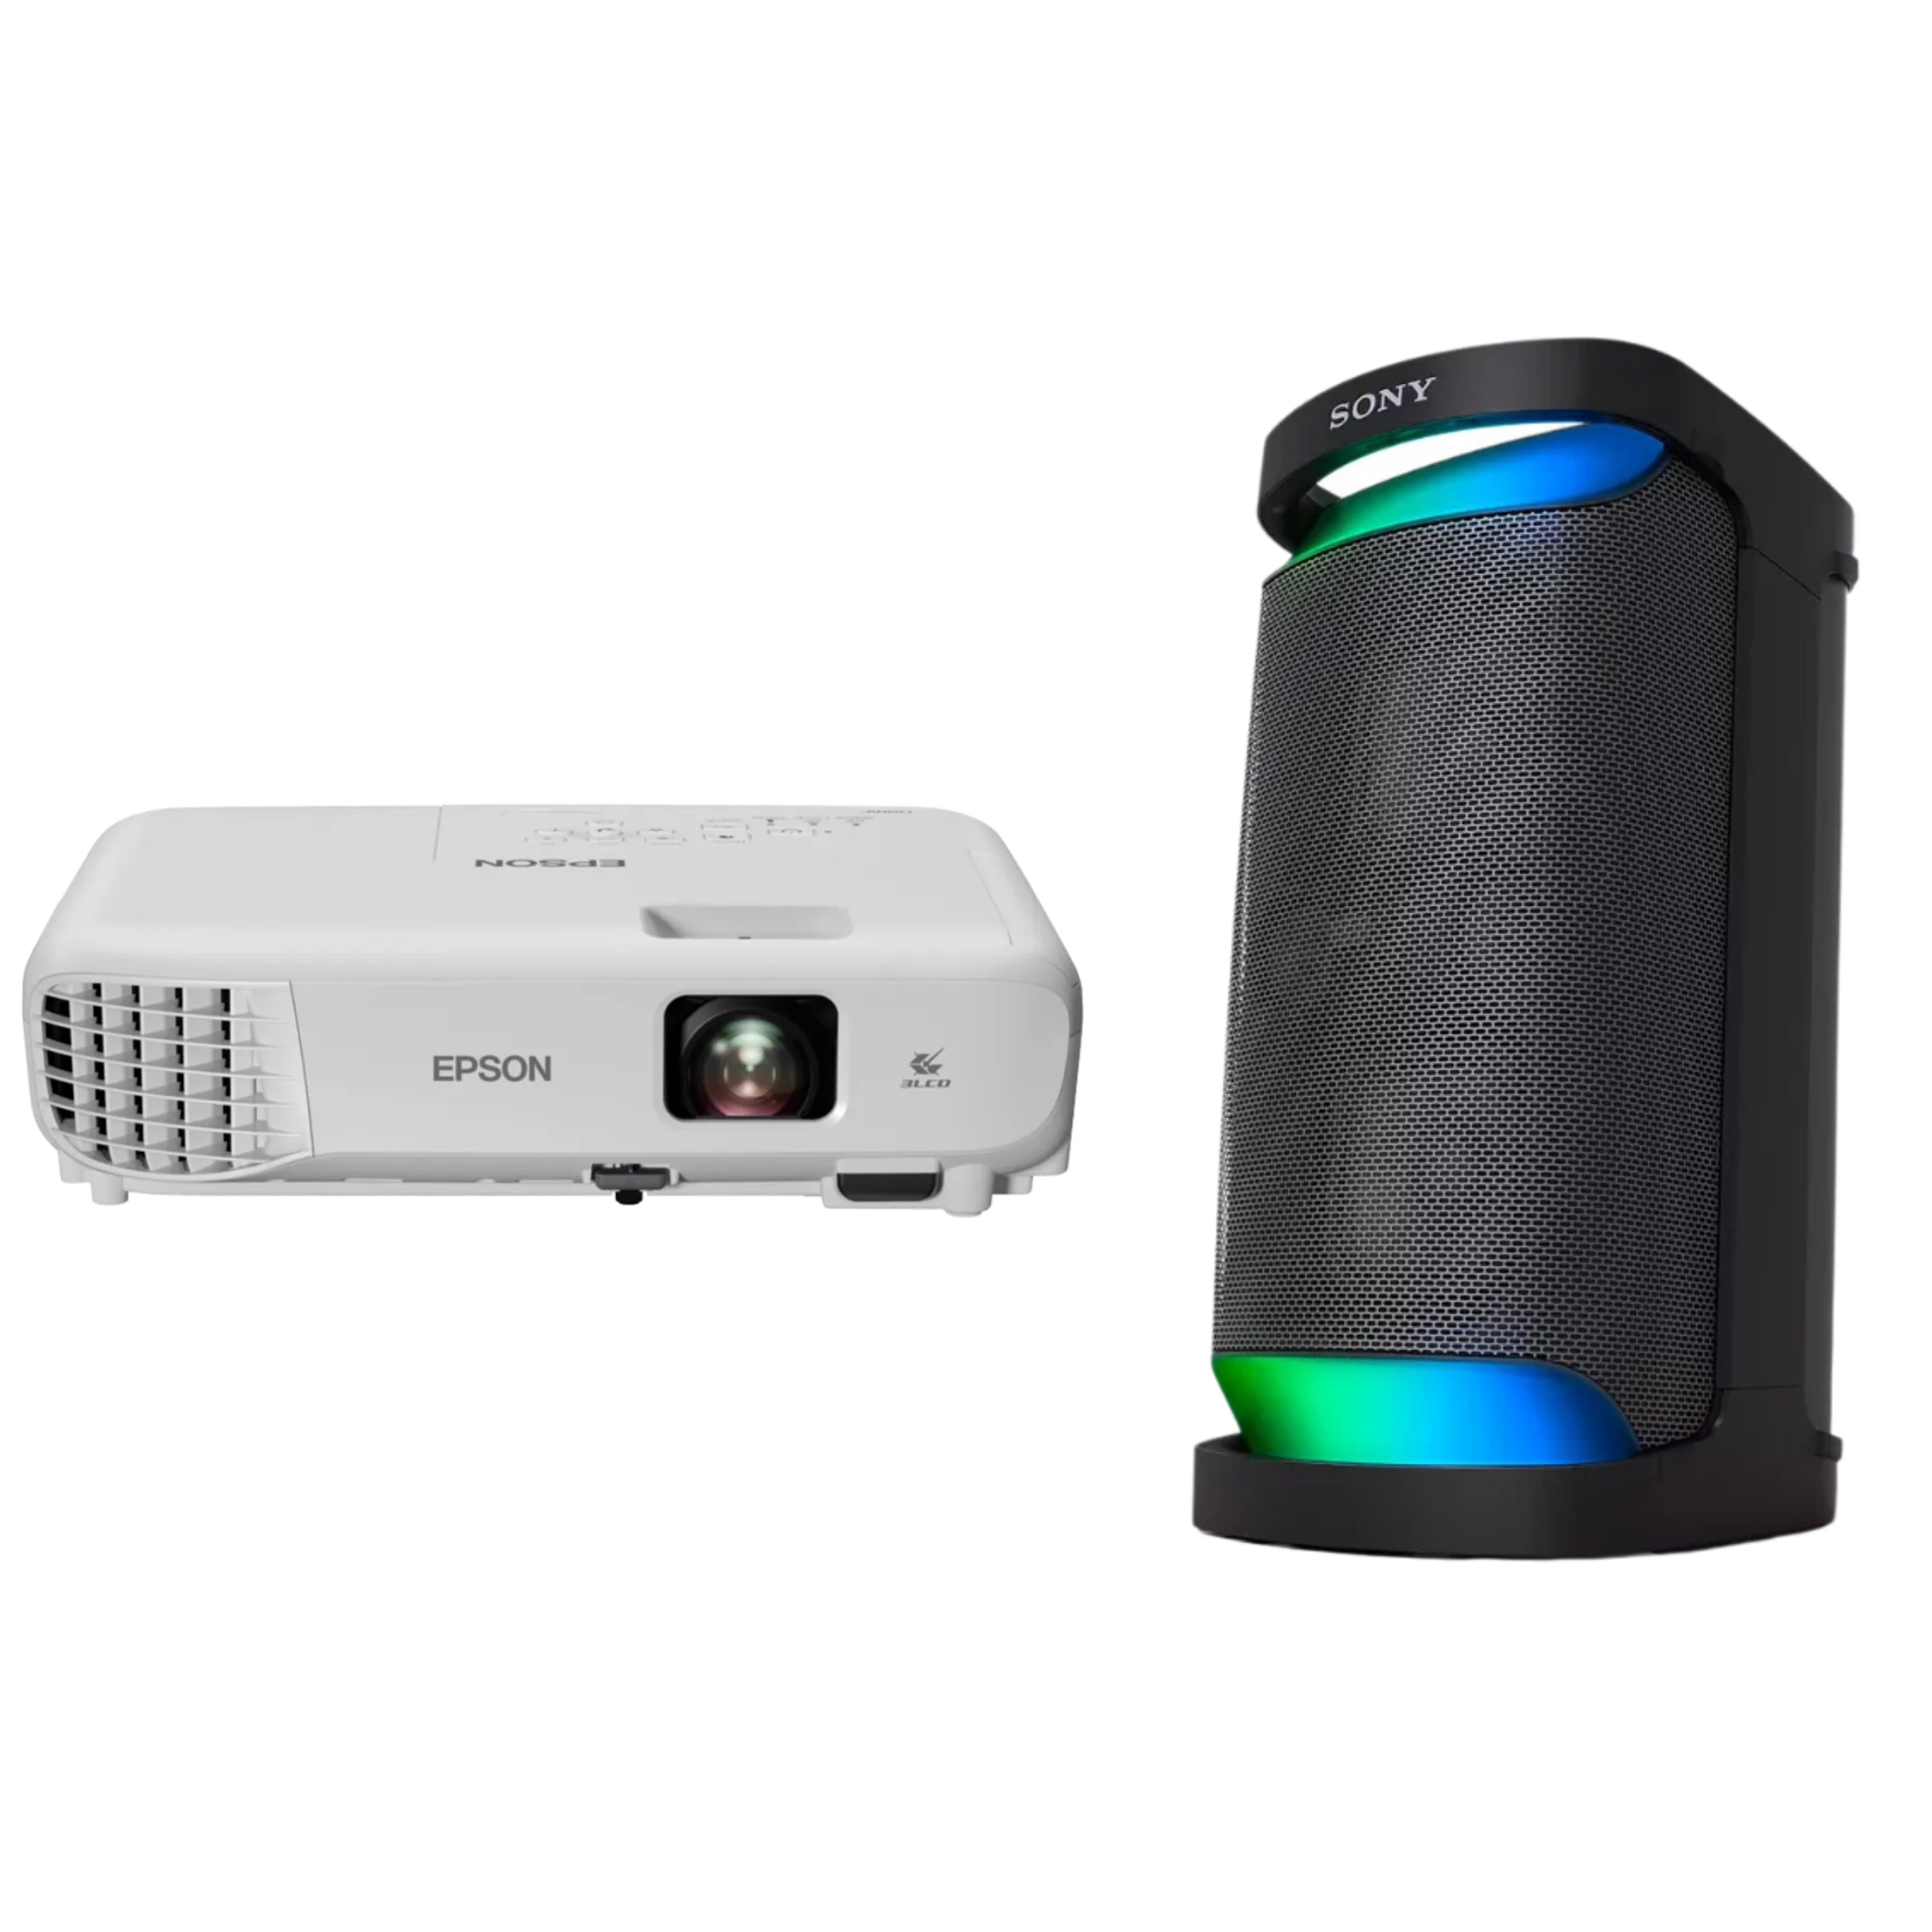 This is an image of Epson EB-E01 XGA Projector and speaker combo on rent offered by SharePal.in in Bangalore.